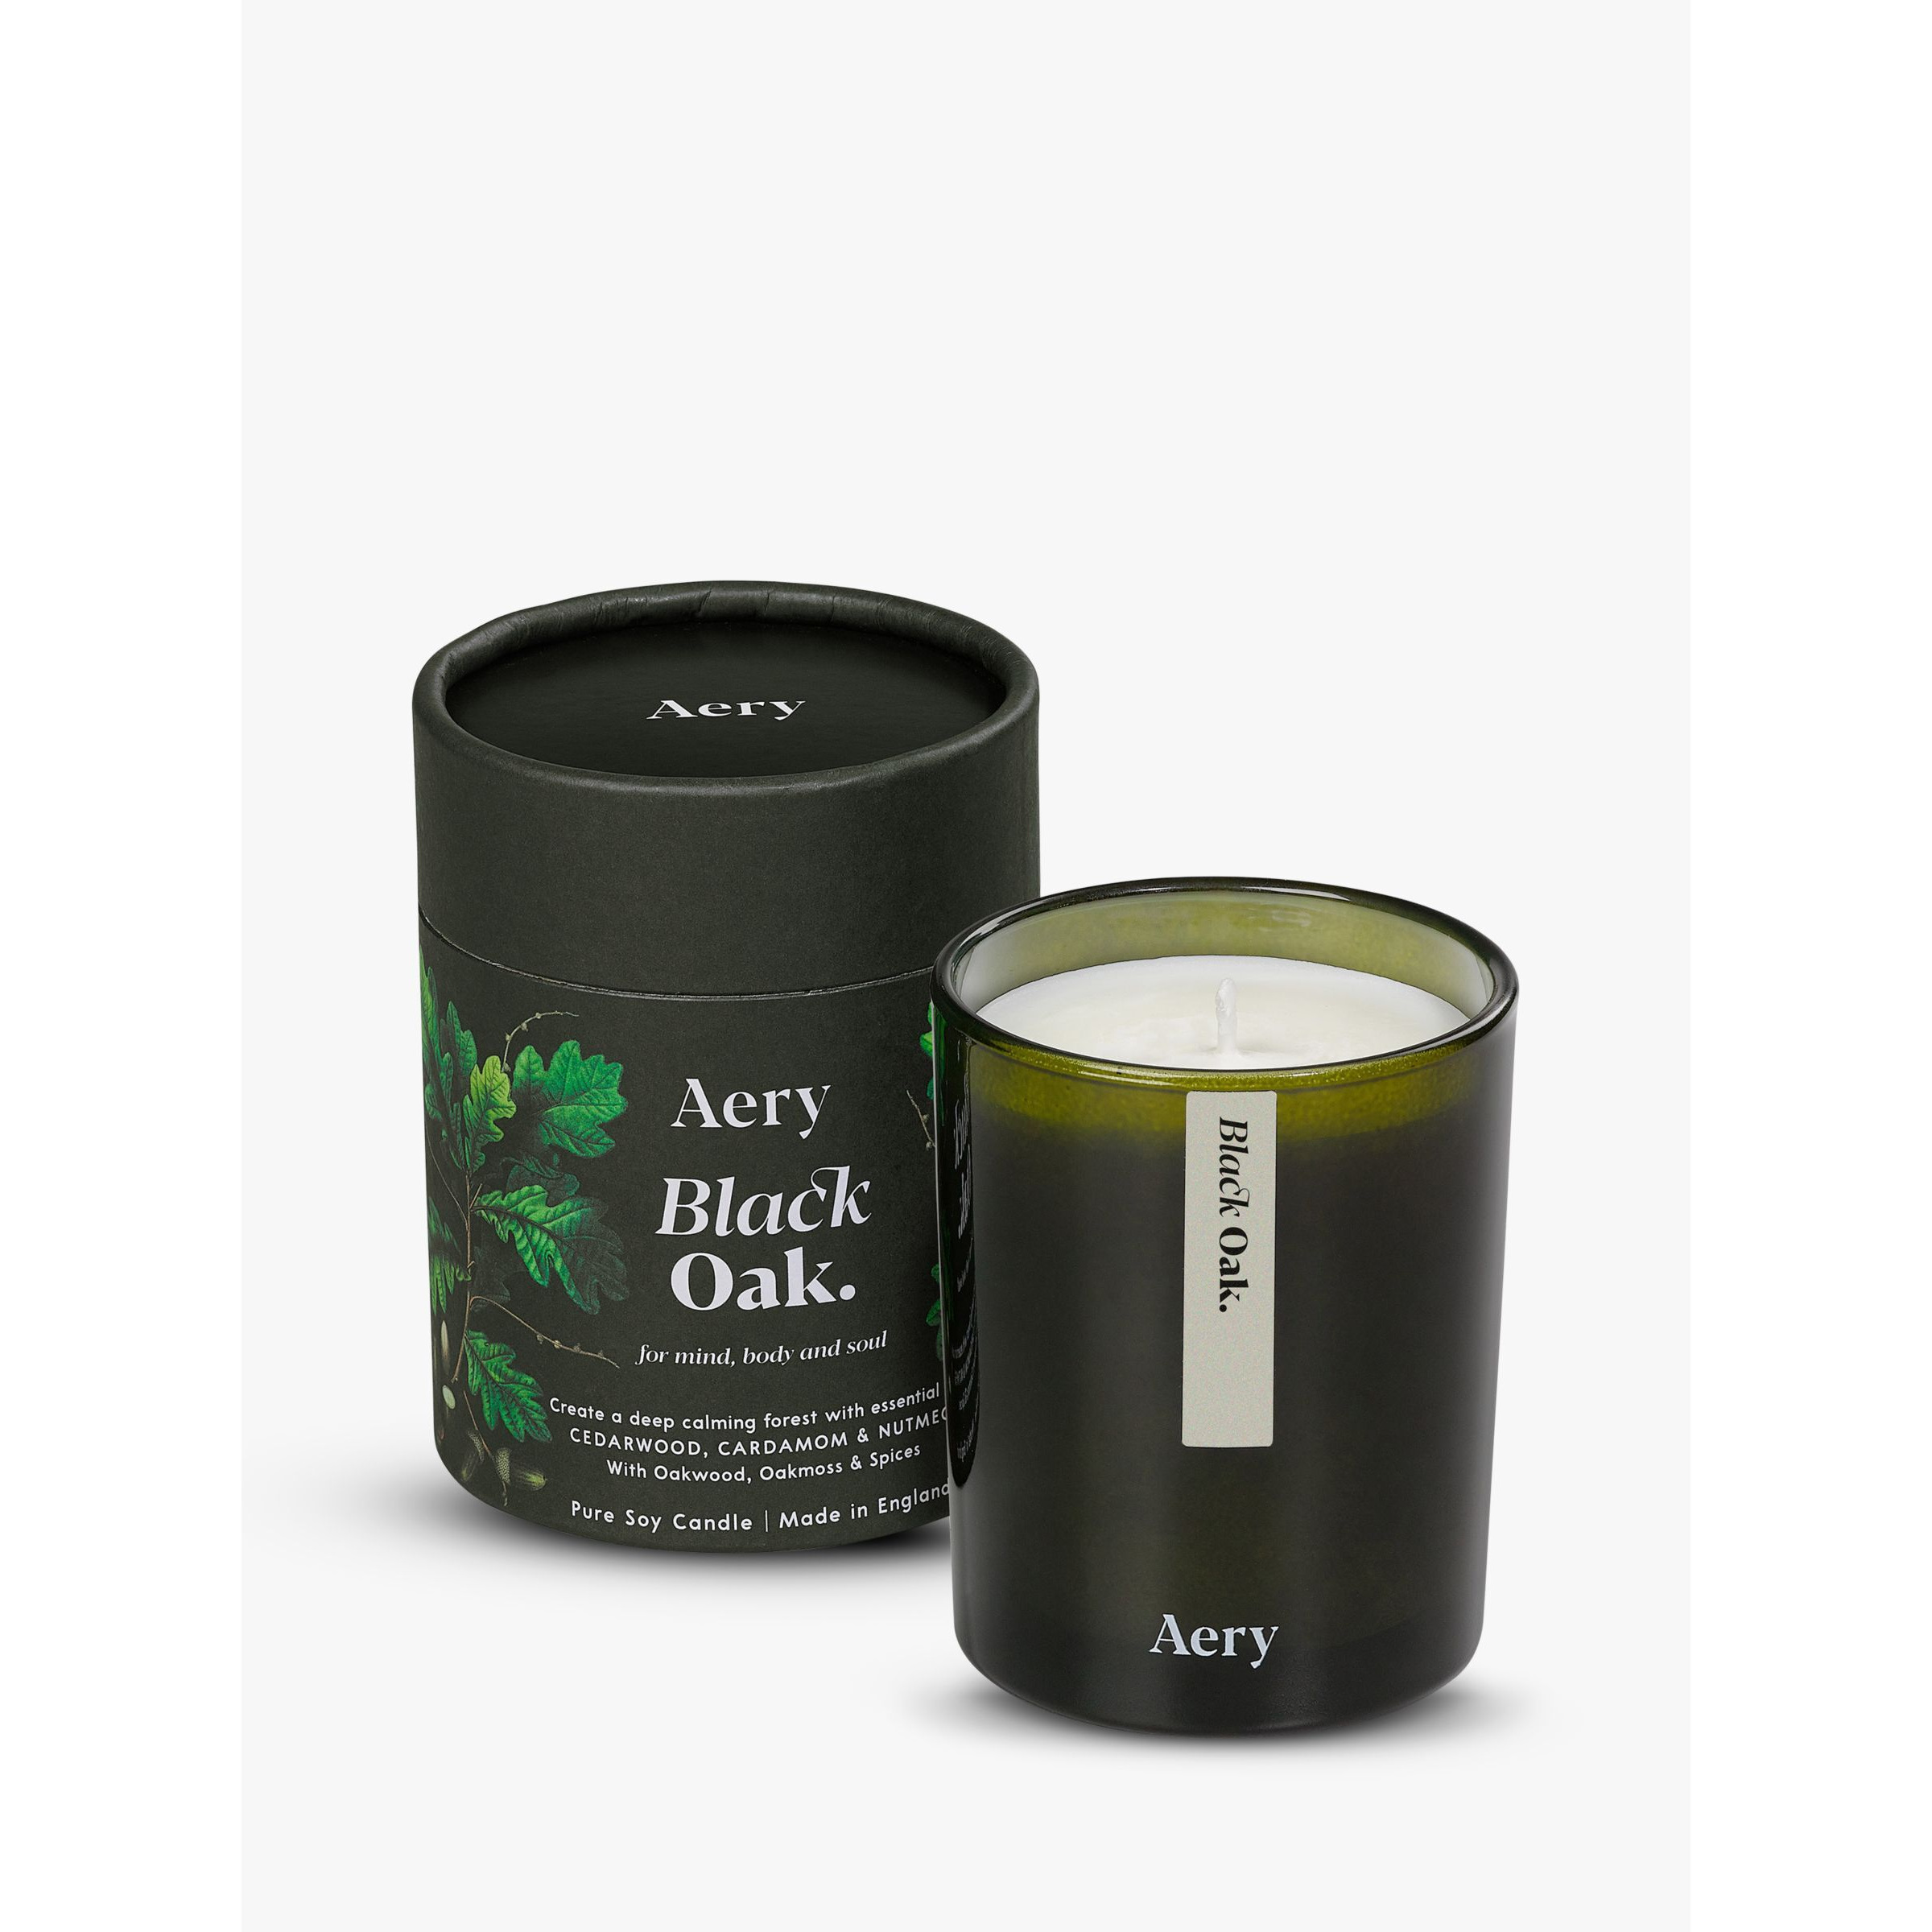 Aery Green Black Oak Scented Candle, 200g - image 1